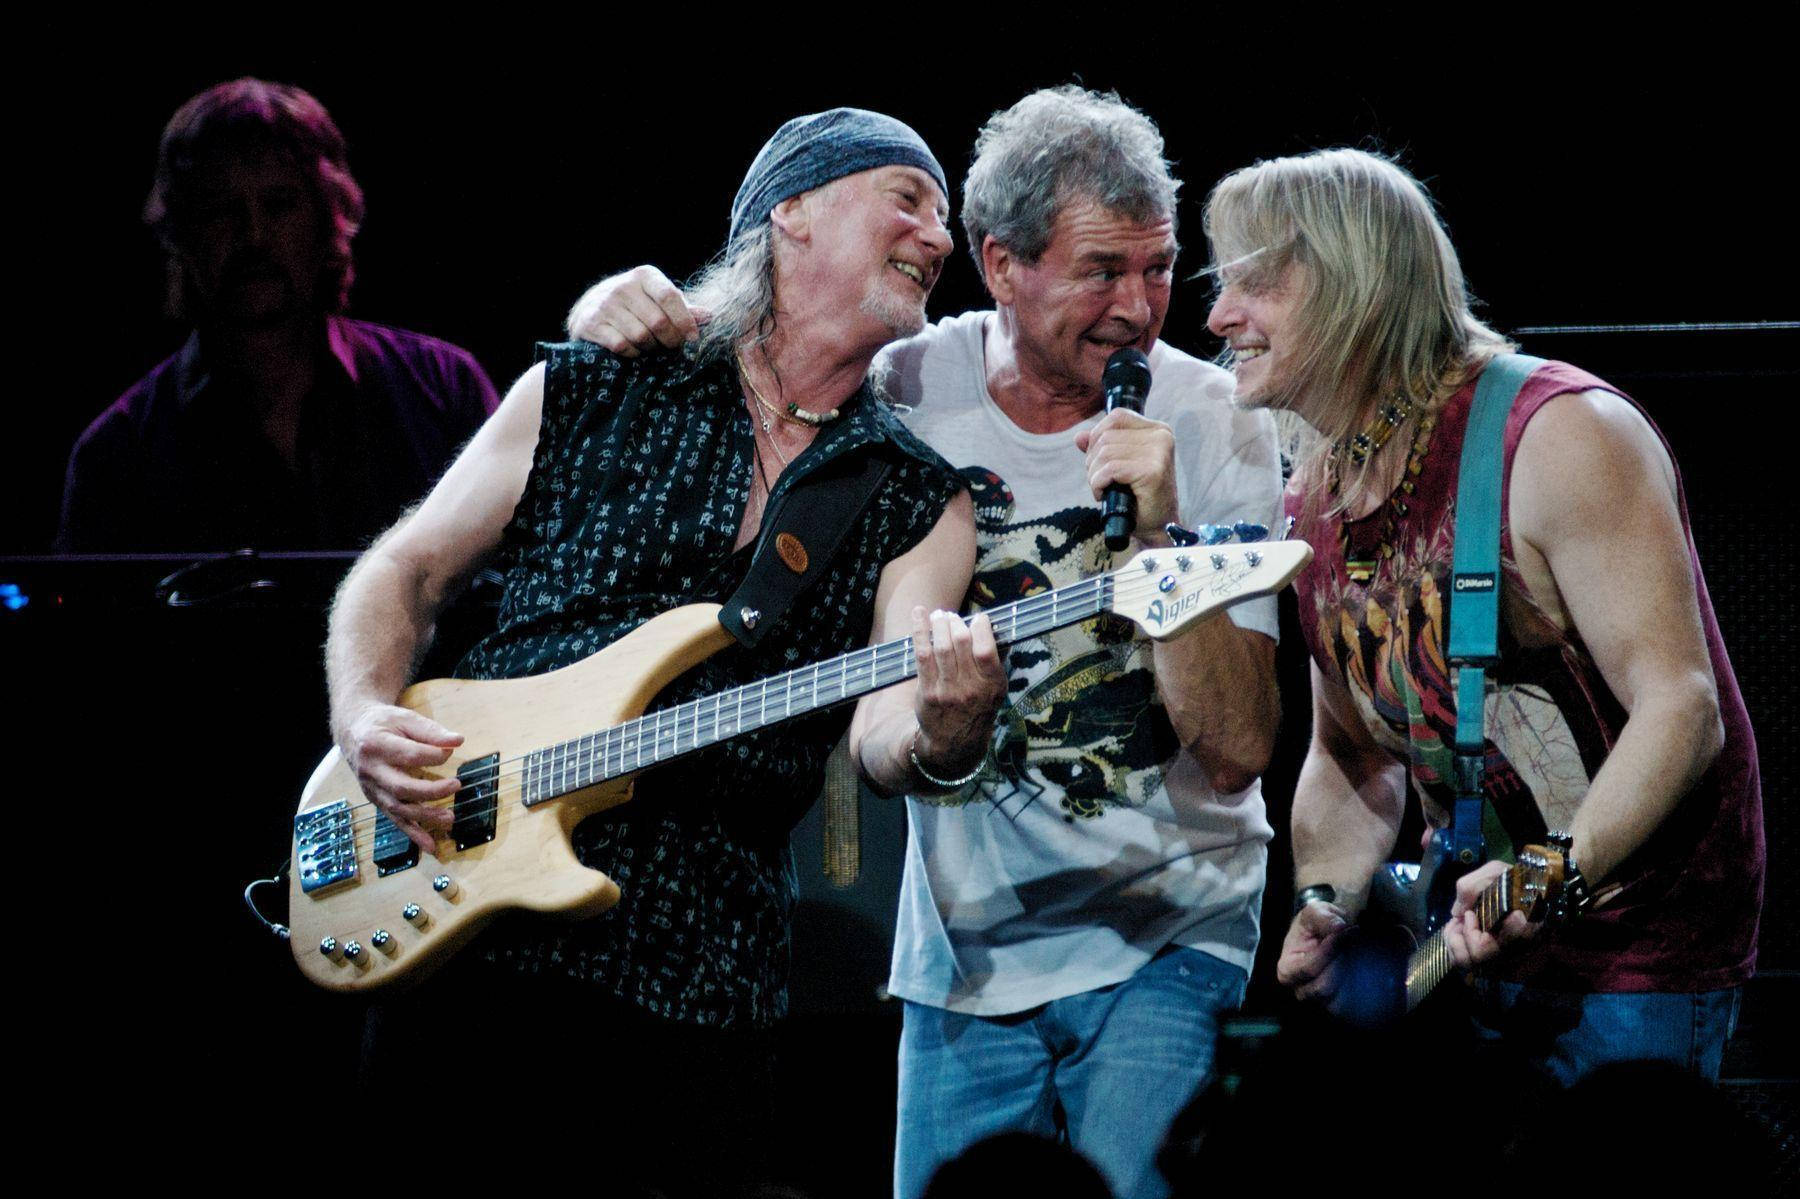 Legendary British rock band Deep Purple performing live during their Rapture of The Deep tour. Wallpaper